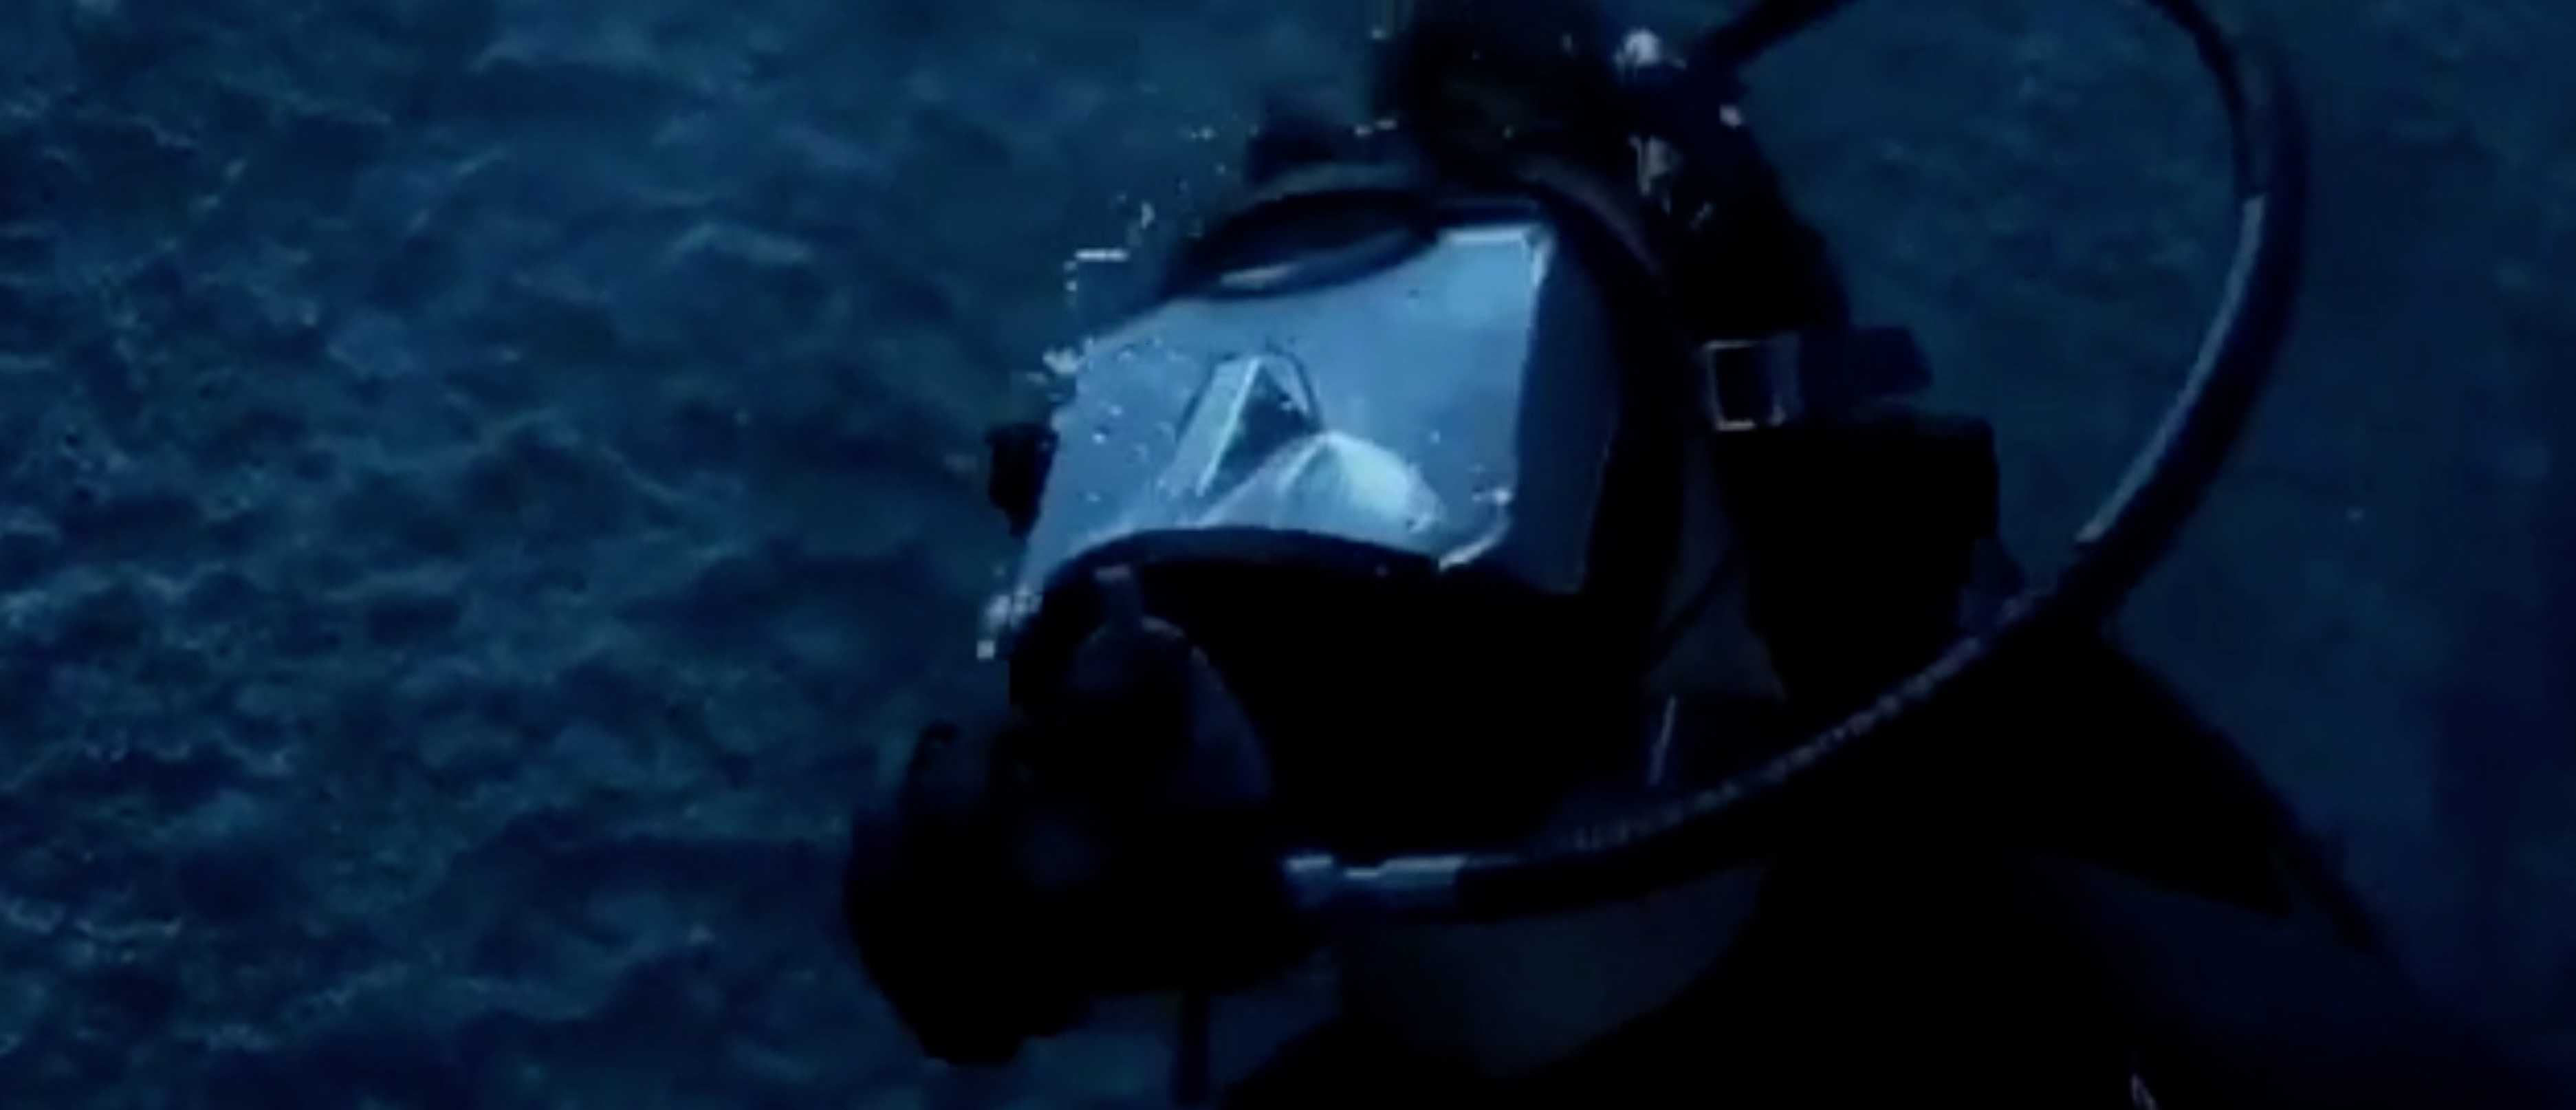 Full Face Diver Out of Air inside Wreck